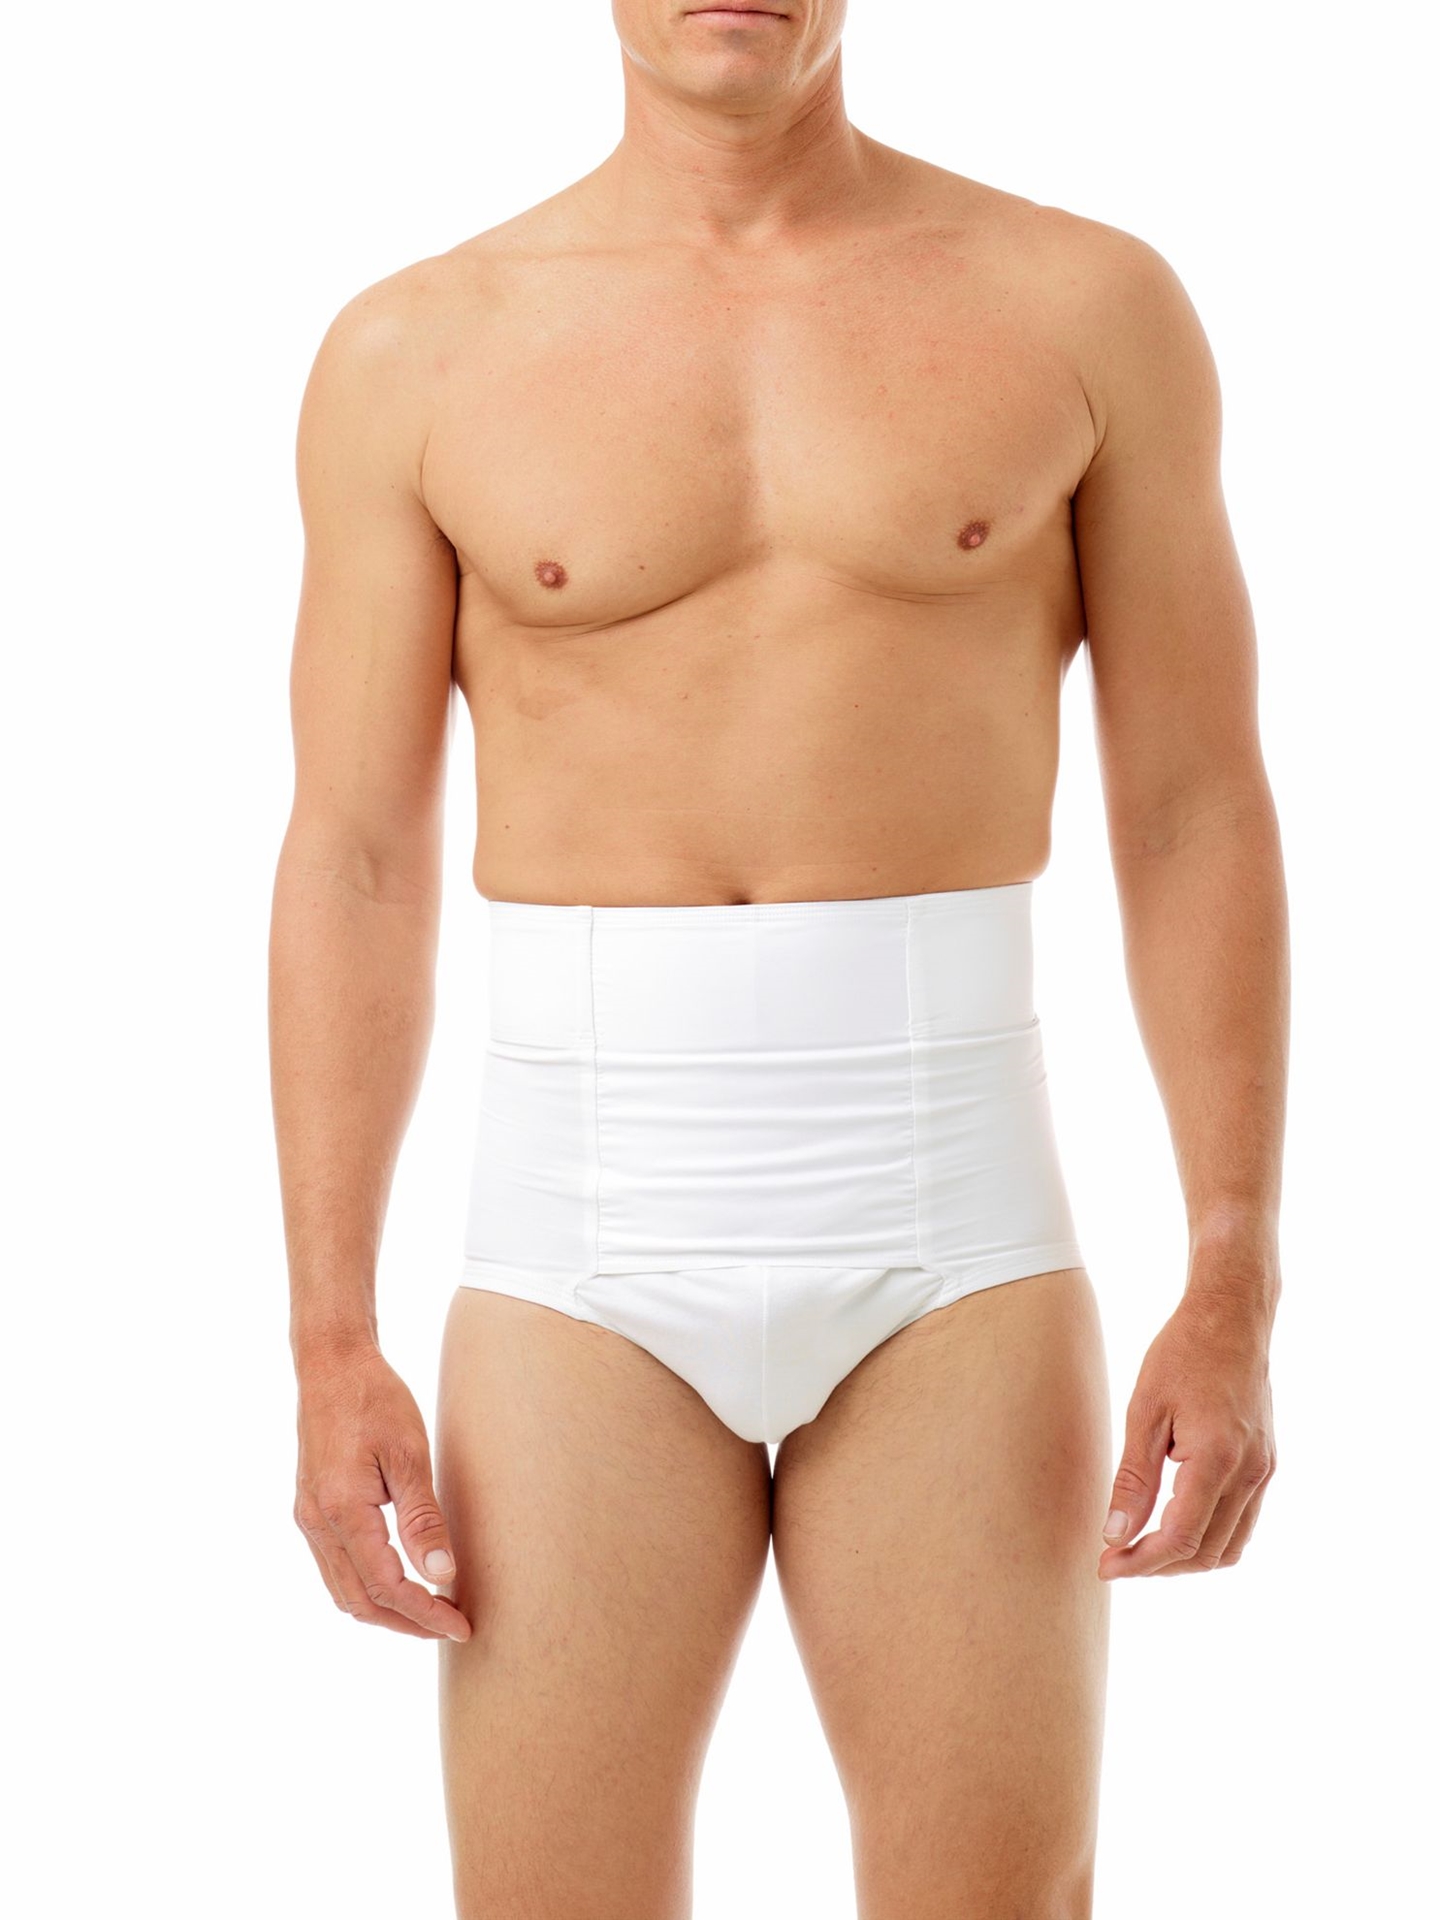 Post Delivery Abdominal Binder 9-inch with Velcro Closure. Men Compression  Shirts, Girdles, Chest Binders, Hernia Garments